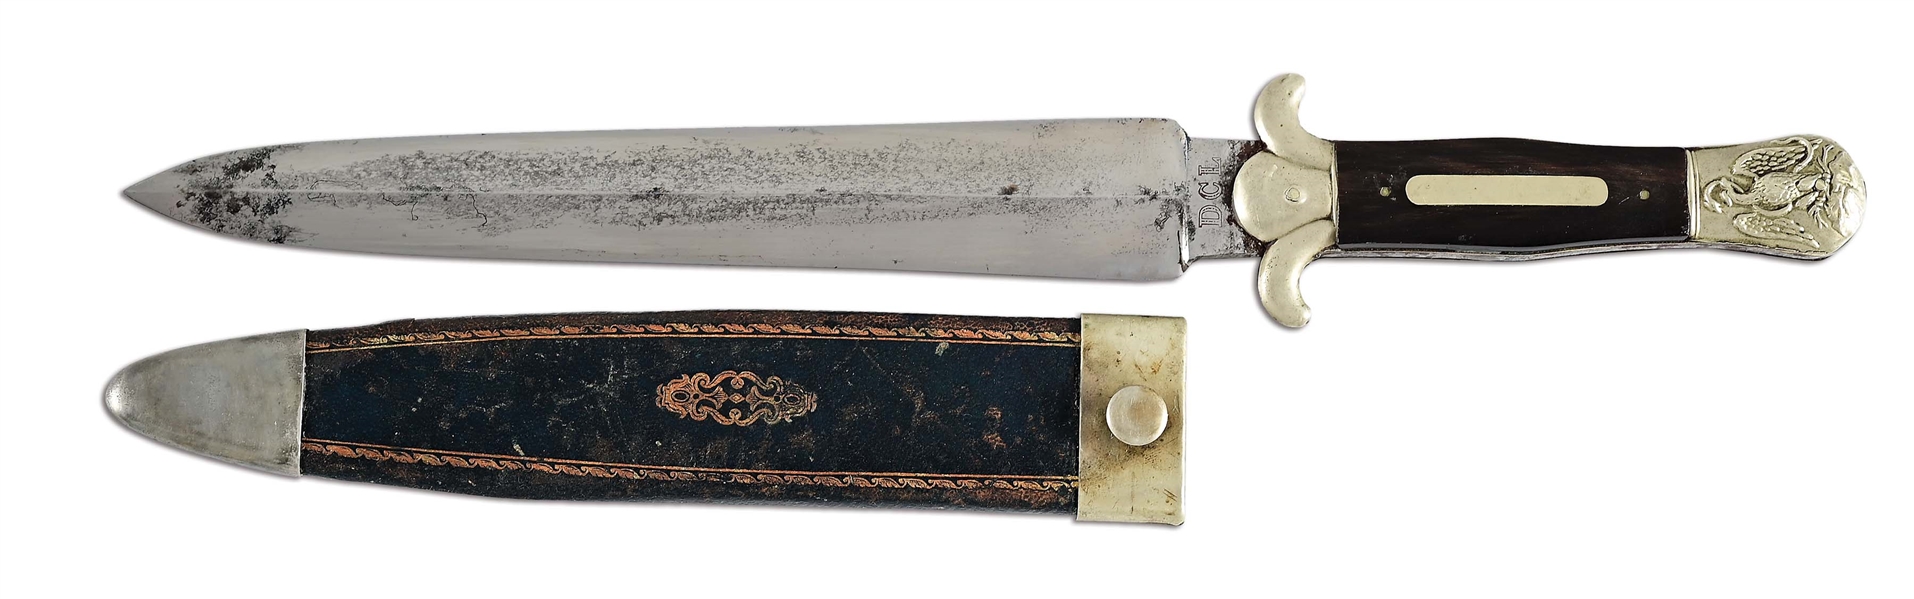 SHEFFIELD BOWIE KNIFE WITH MEXICAN EAGLE POMMEL.